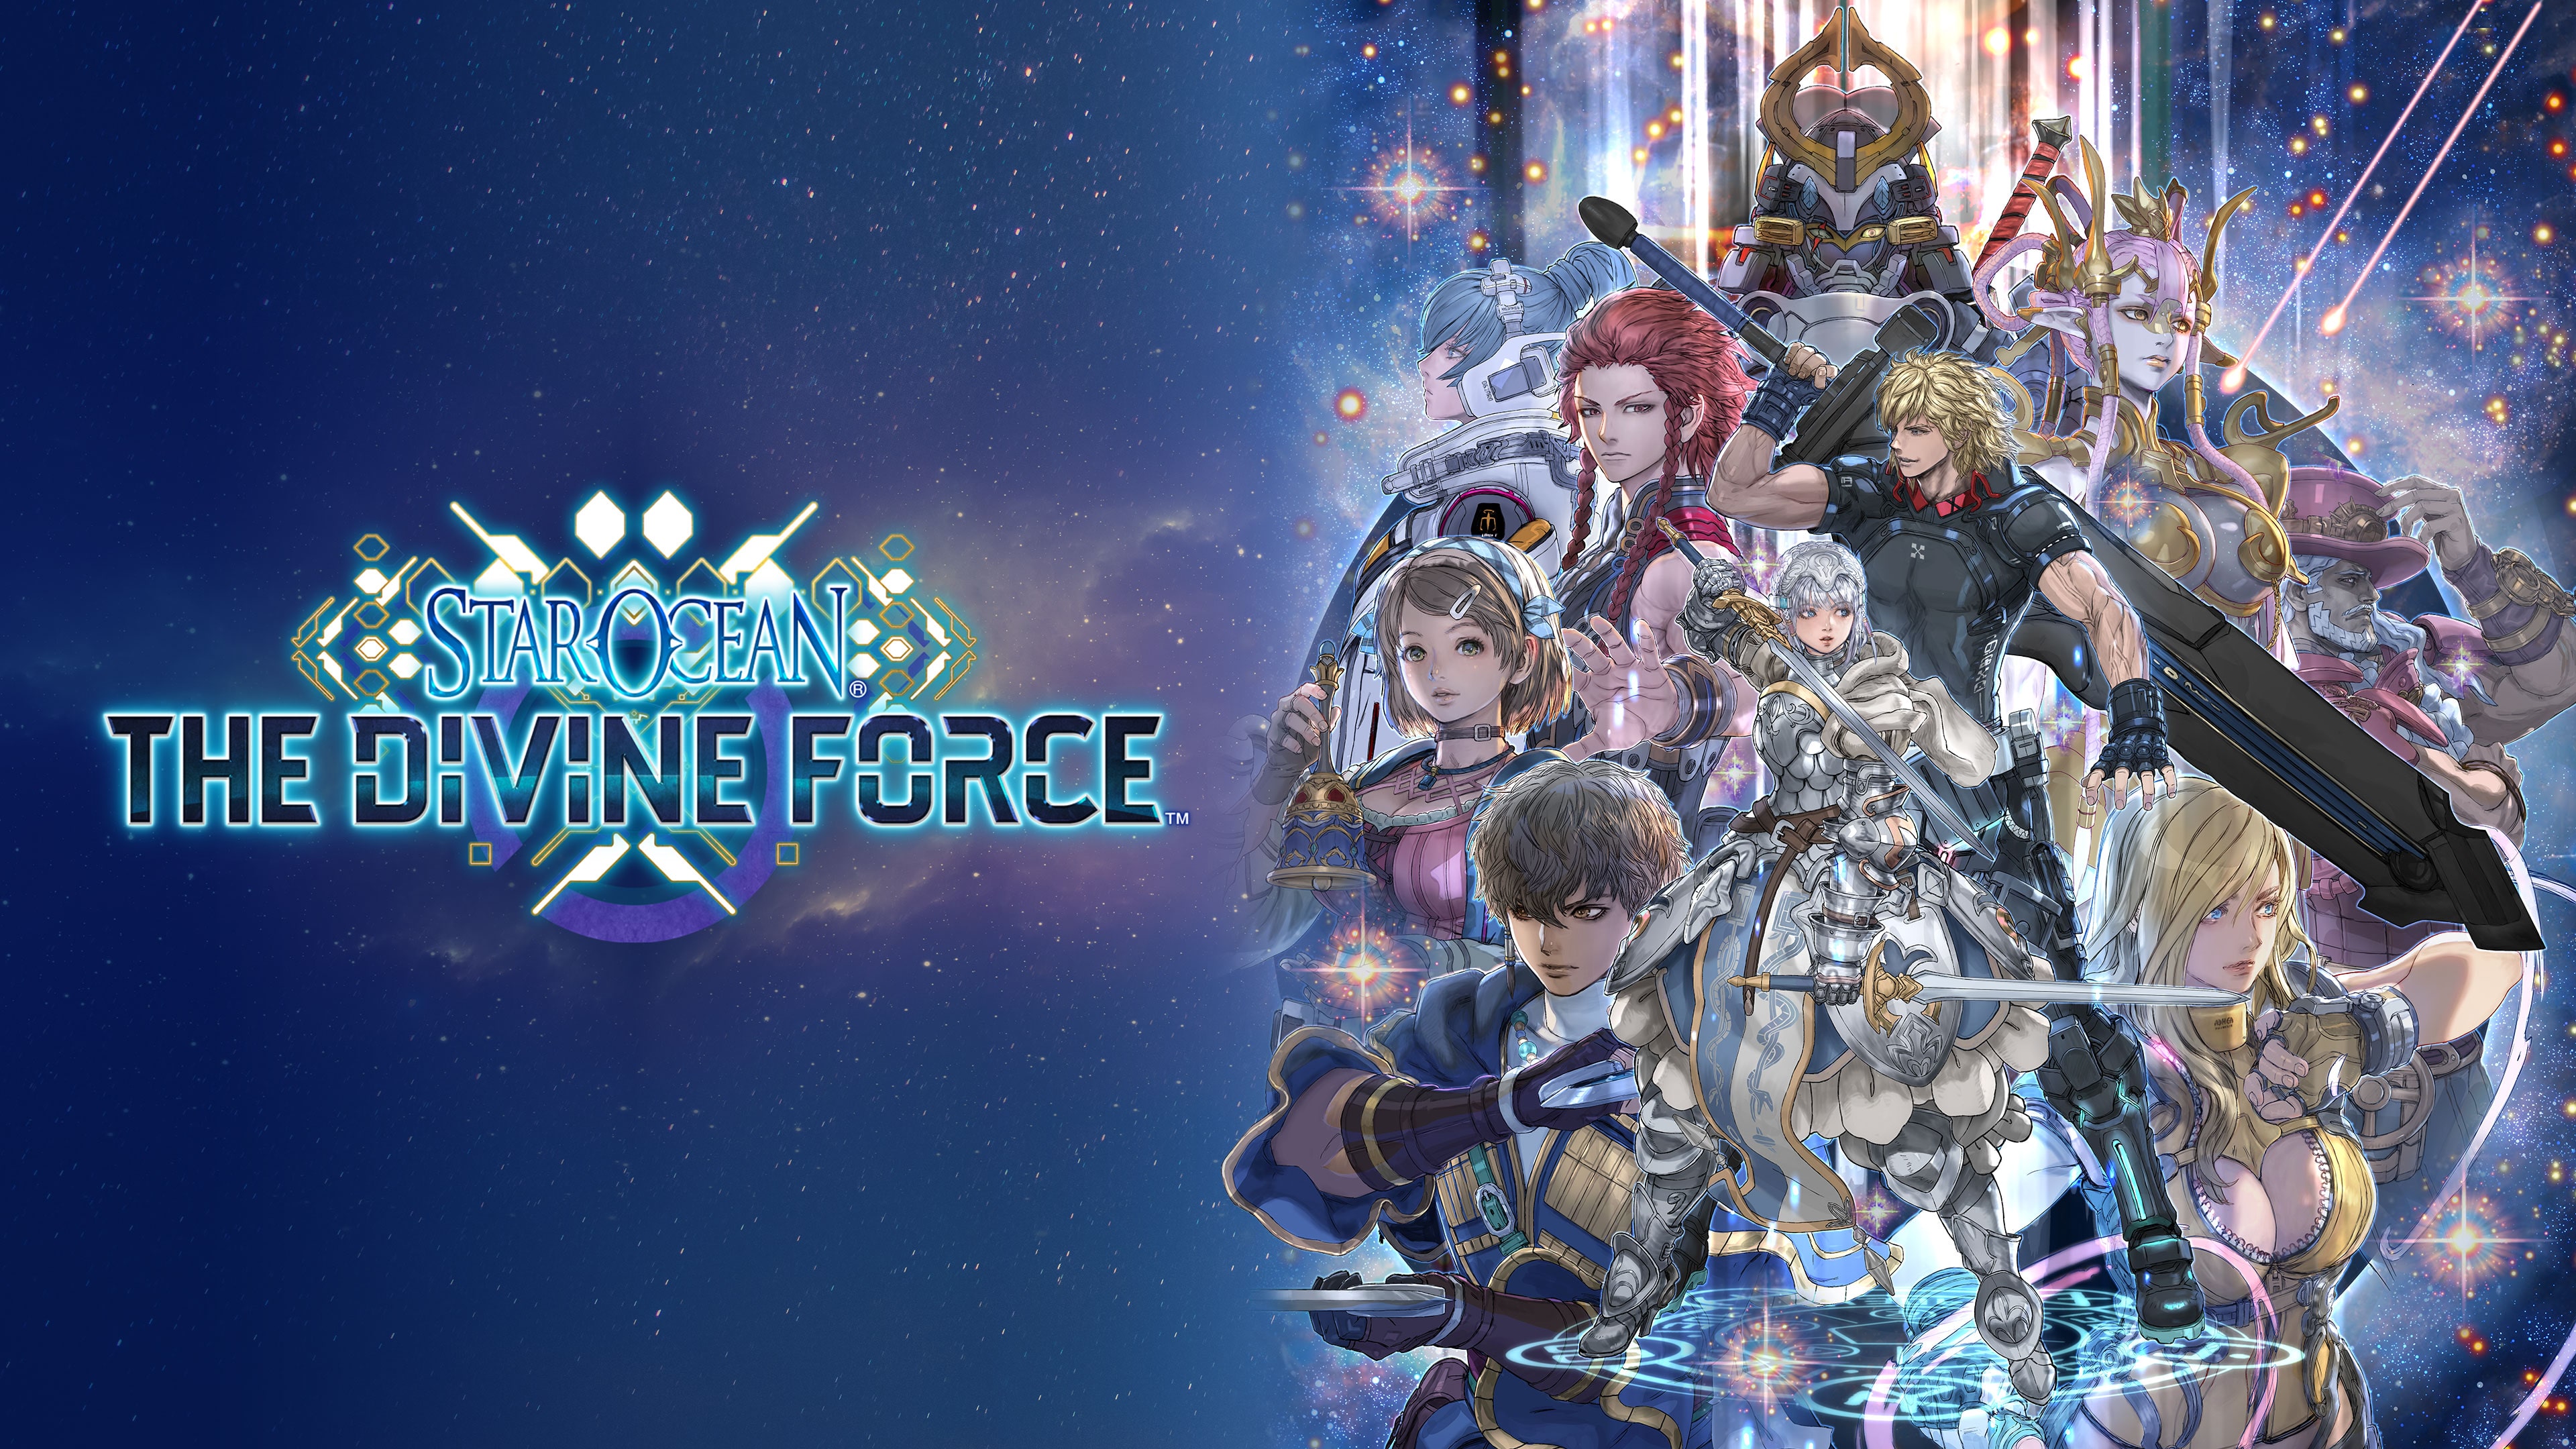 STAR OCEAN THE DIVINE FORCE (Simplified Chinese, English, Korean, Japanese, Traditional Chinese)